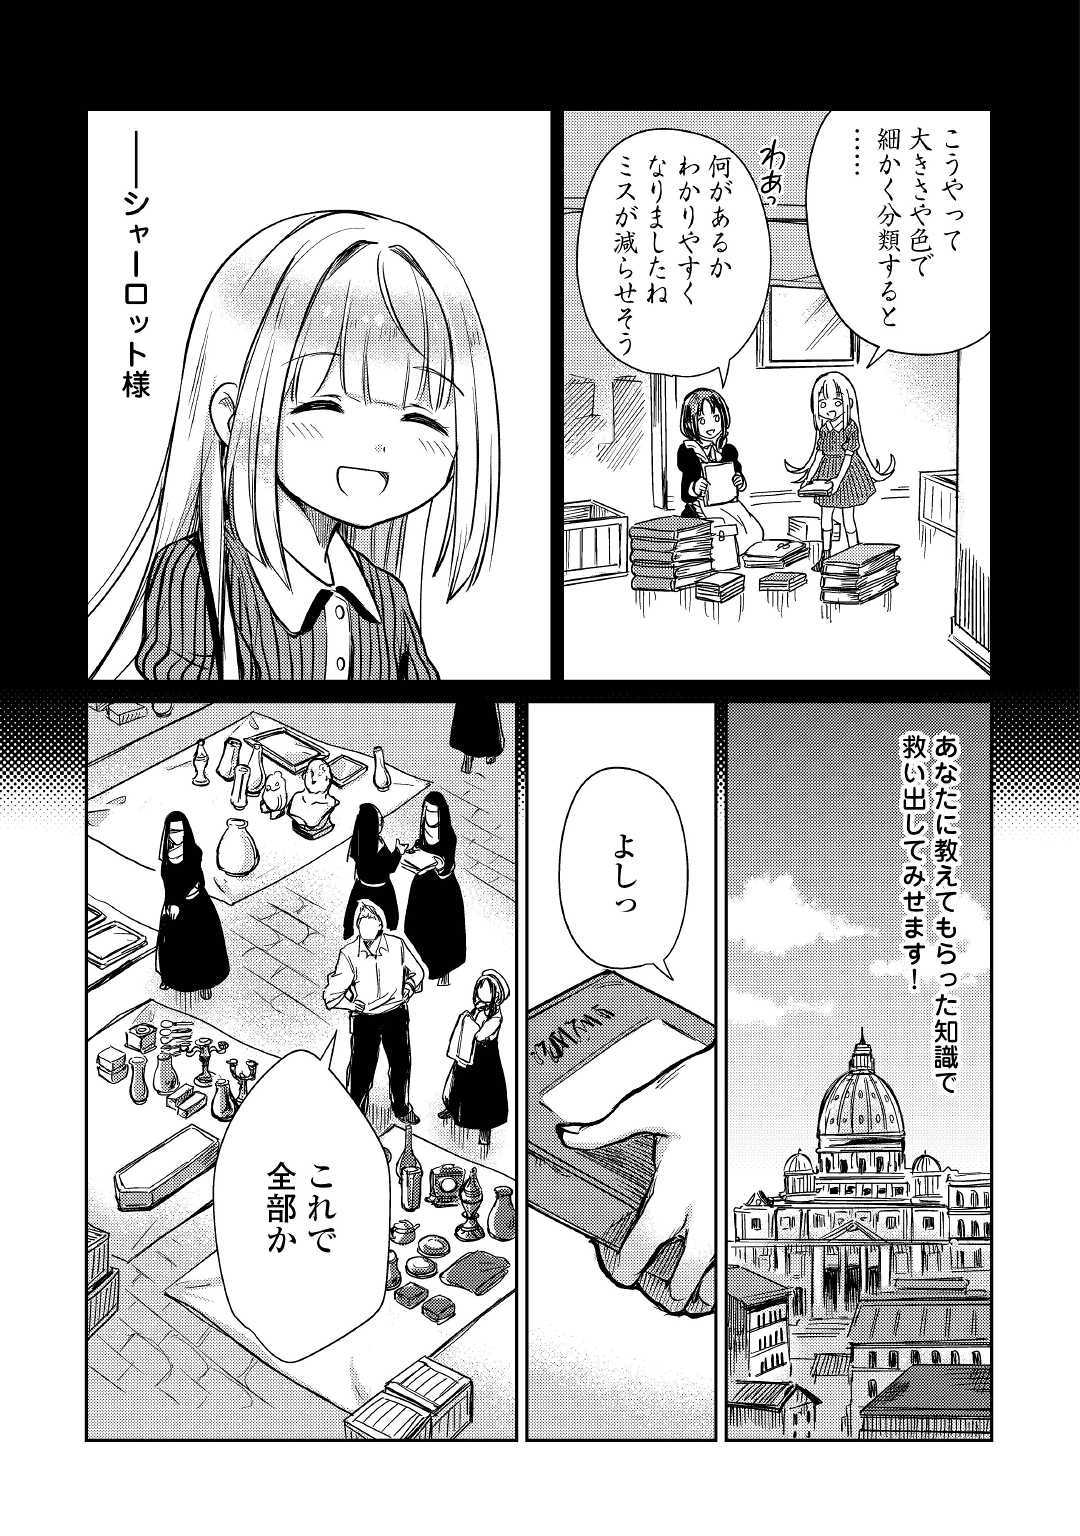 The Former Structural Researcher’s Story of Otherworldly Adventure 第20話 - Page 16